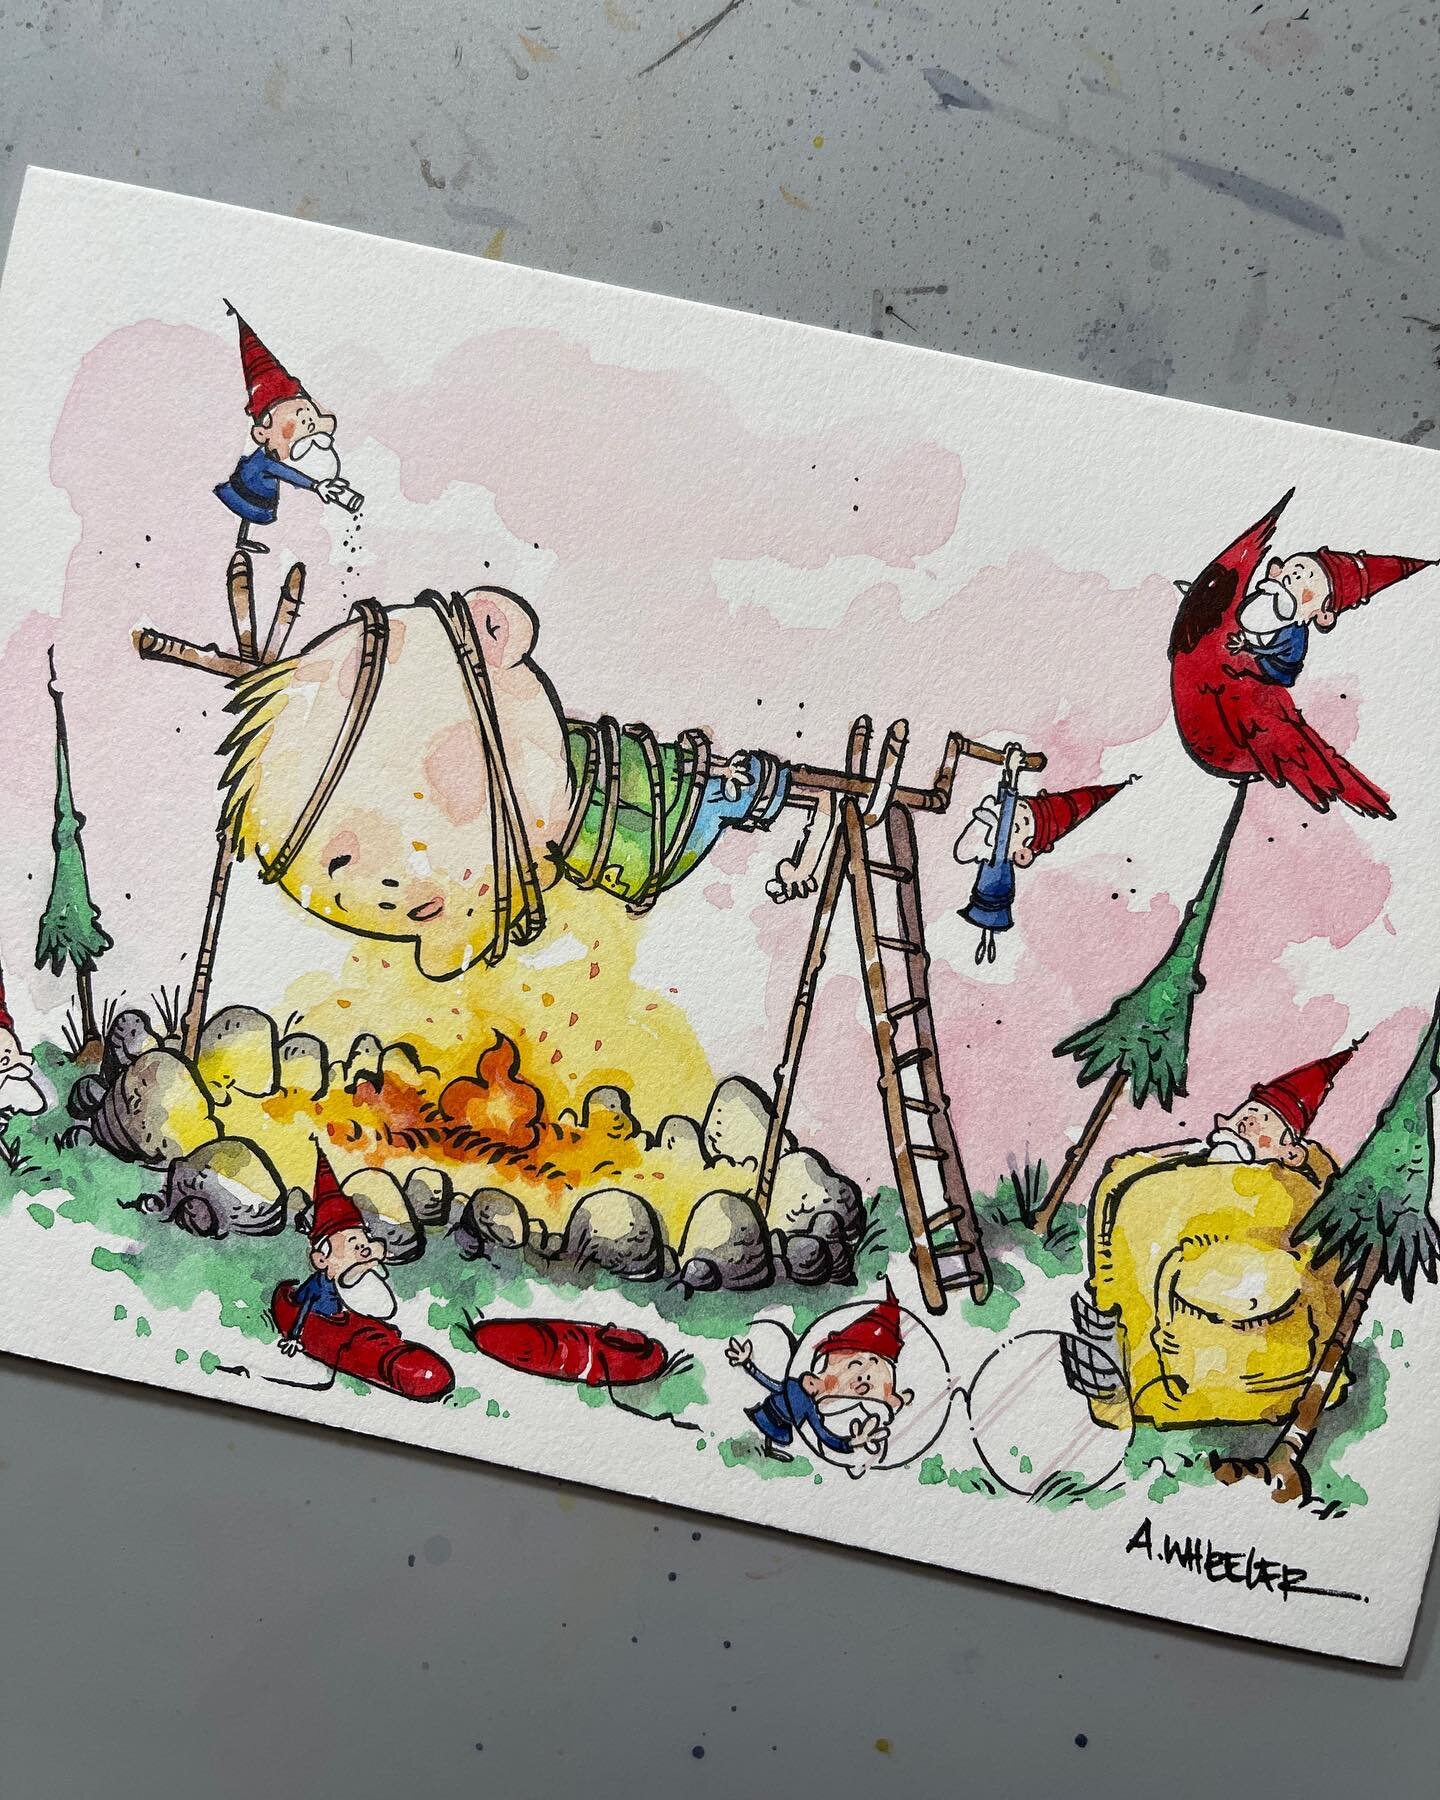 Gil vs. Gnomes. An epic battle years in the making took an immediate and unfortunate twist for Gil who was swiftly captured, tied up and then roasted.  Gnomes win again. (What is it with these f*cking Gnomes??) #anthonywheelerart #watercolor #illustr